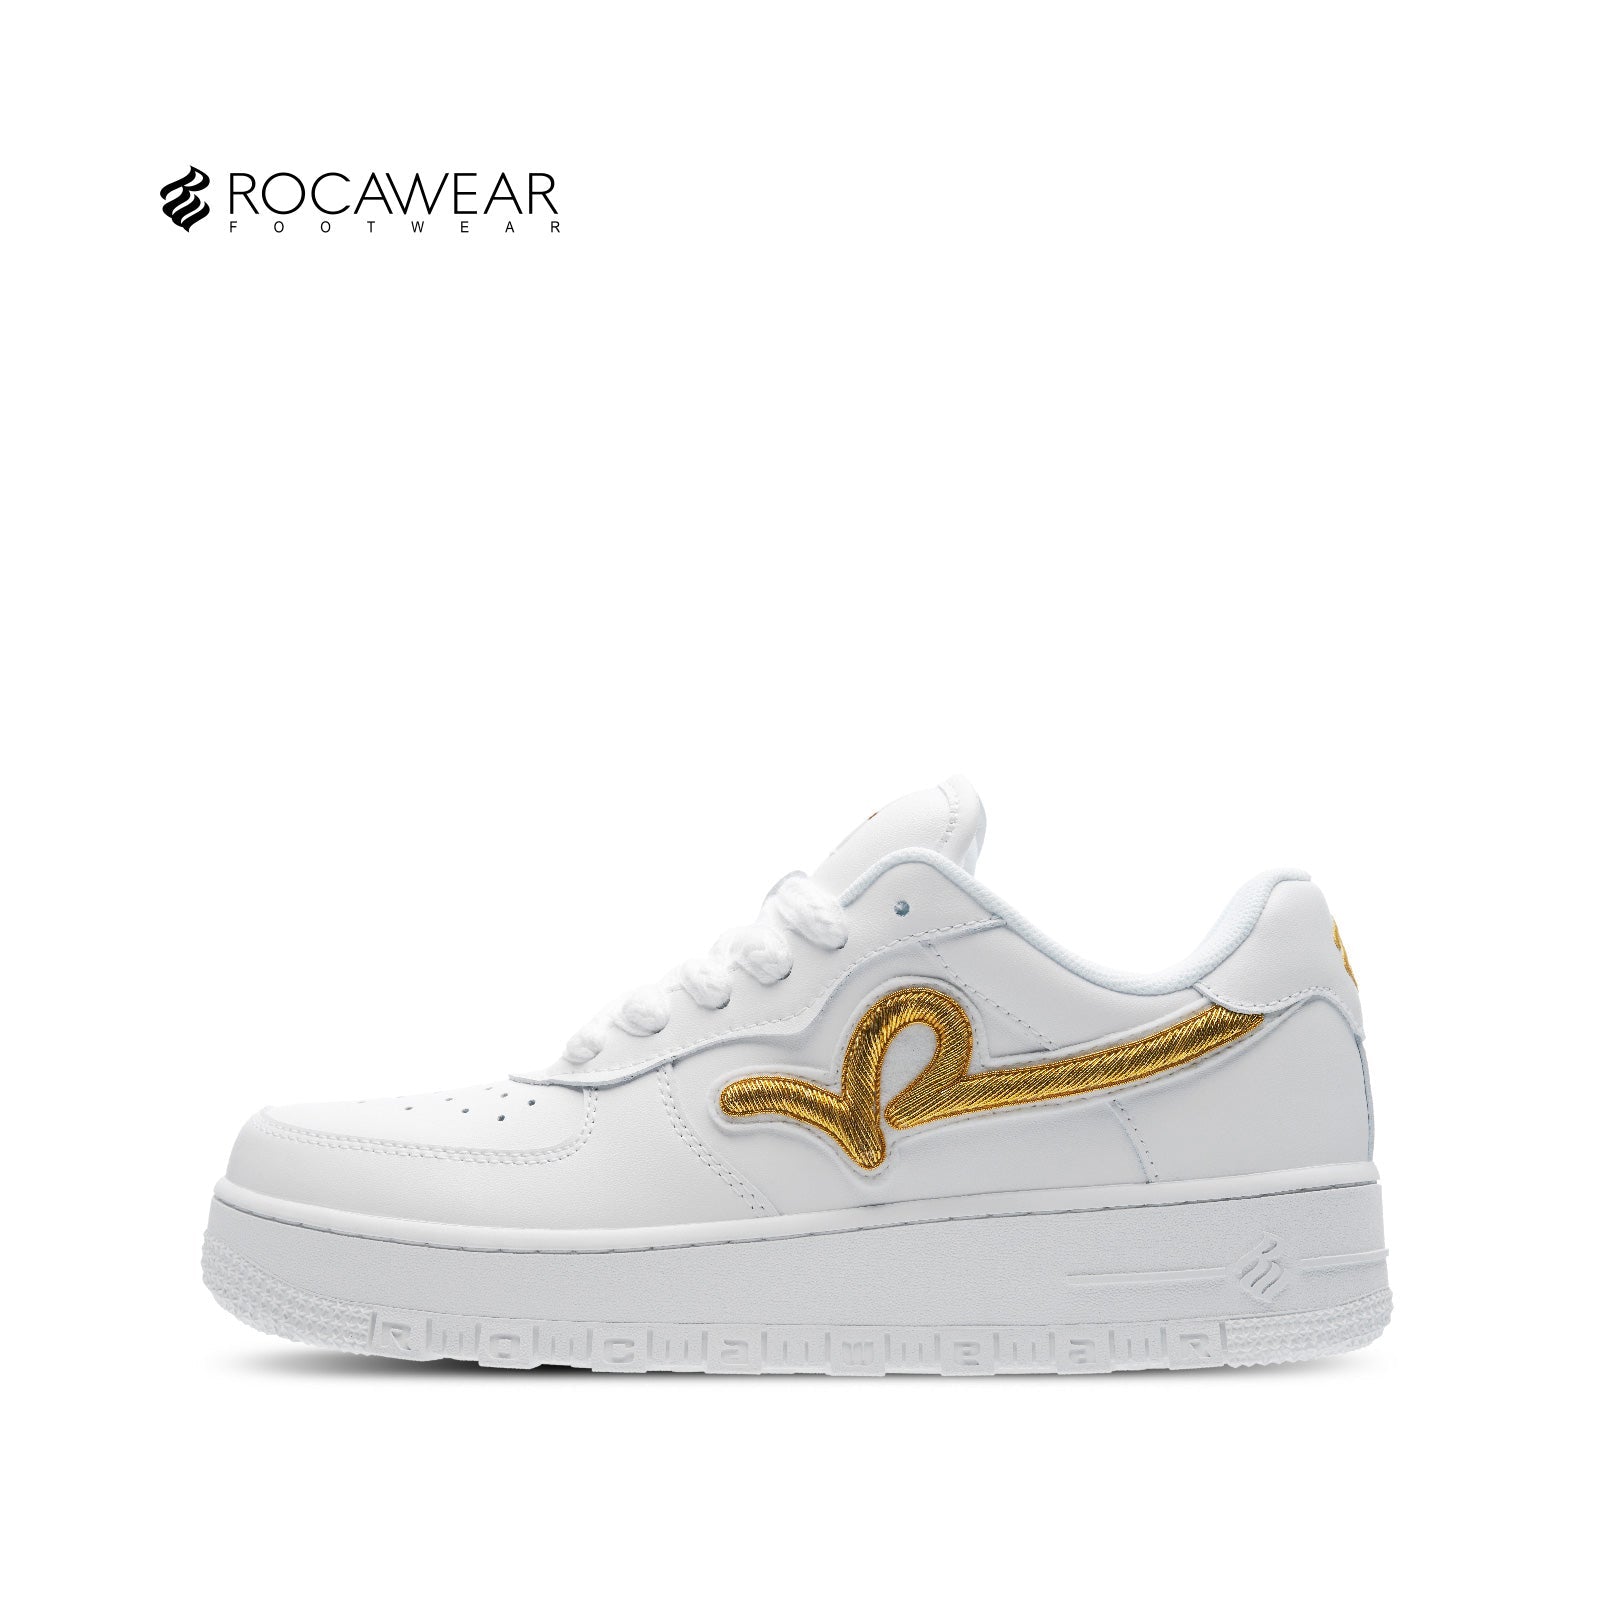 xVESSEL x ROCAWEAR “Golden Age”